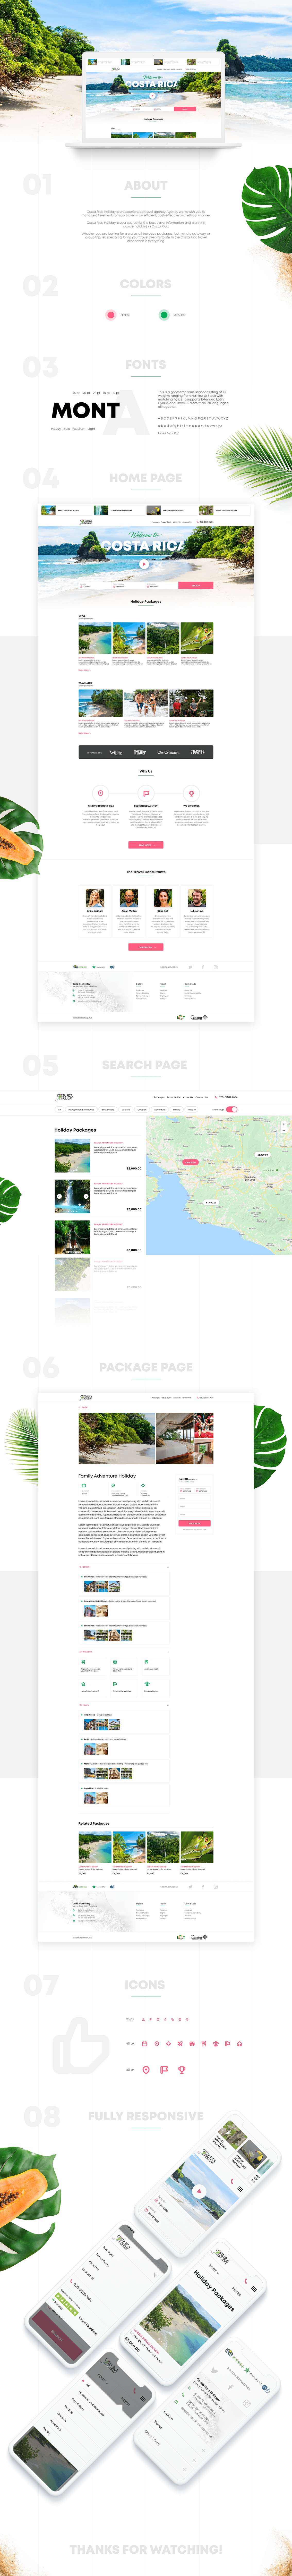 agency design landing page Travel trip UI user experience ux Web